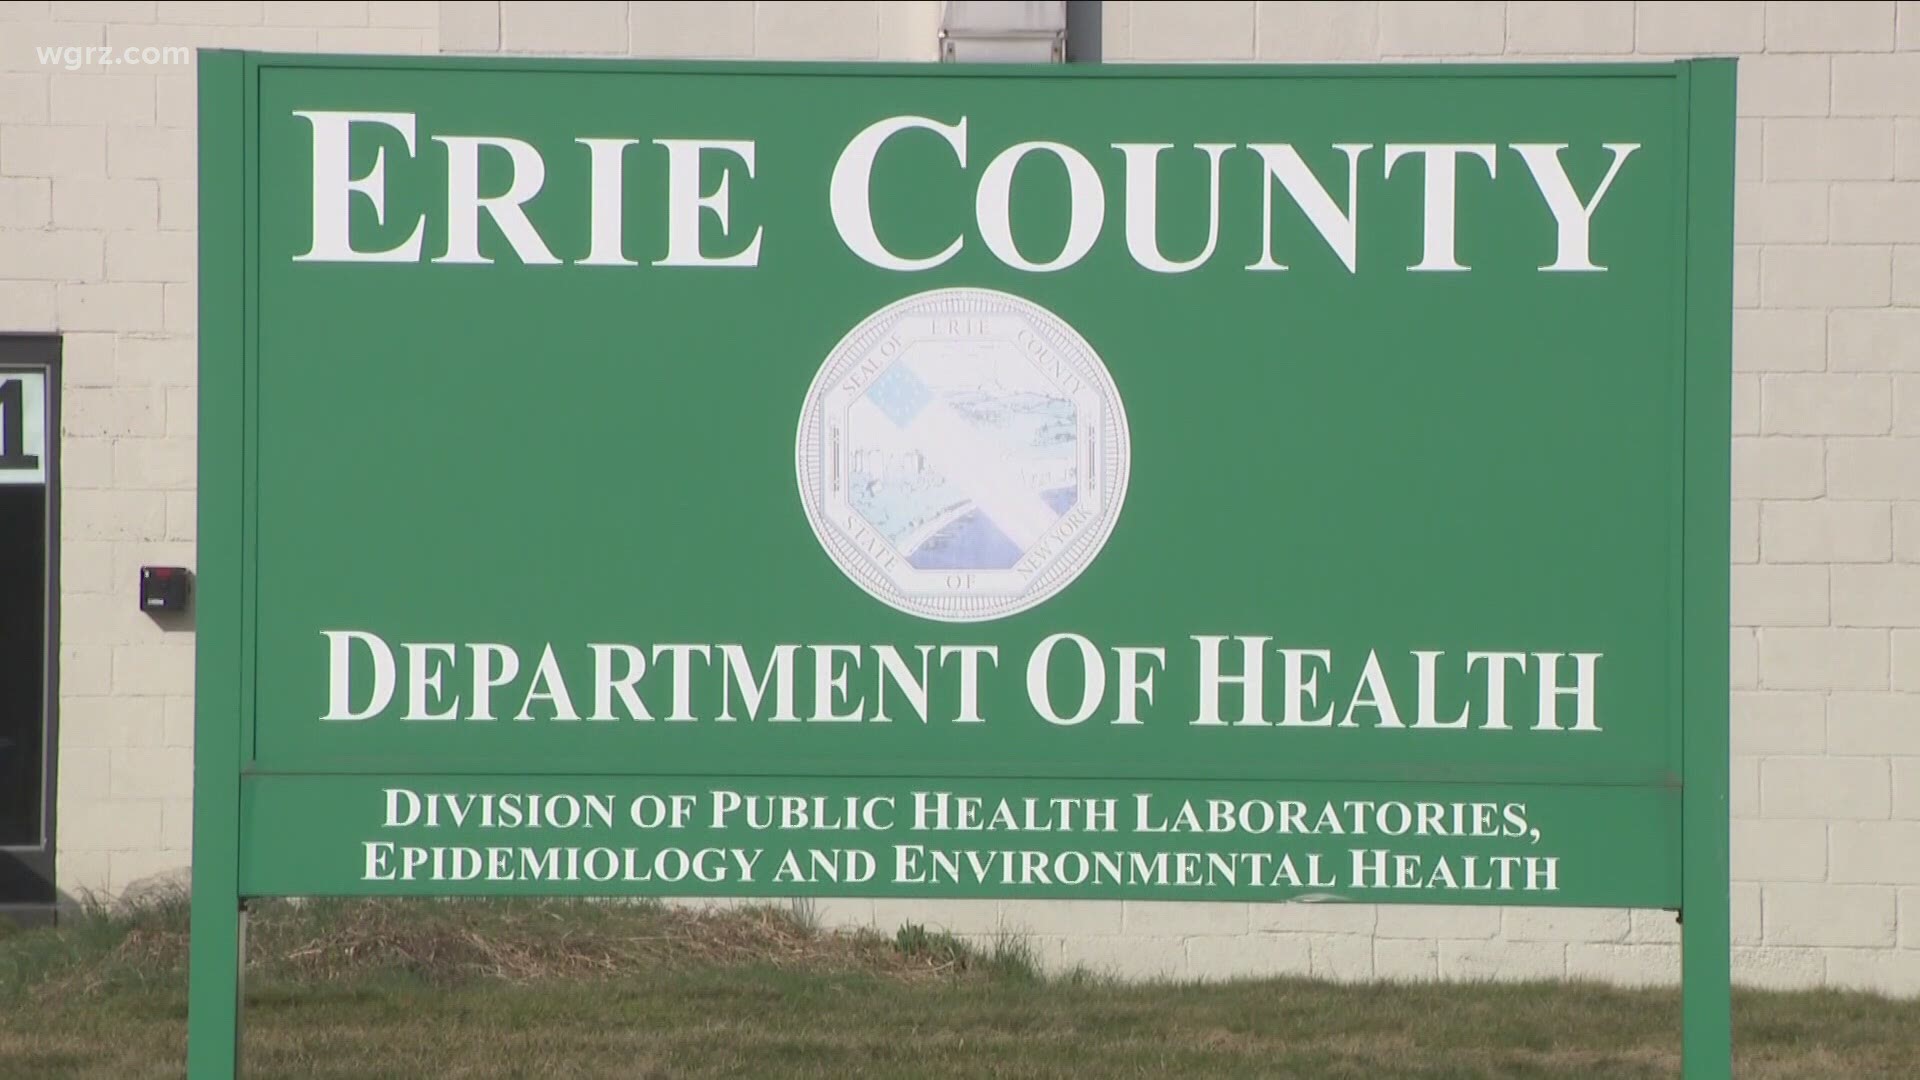 Erie County has seen an increase in new daily Coronavirus cases and hospitalizations.